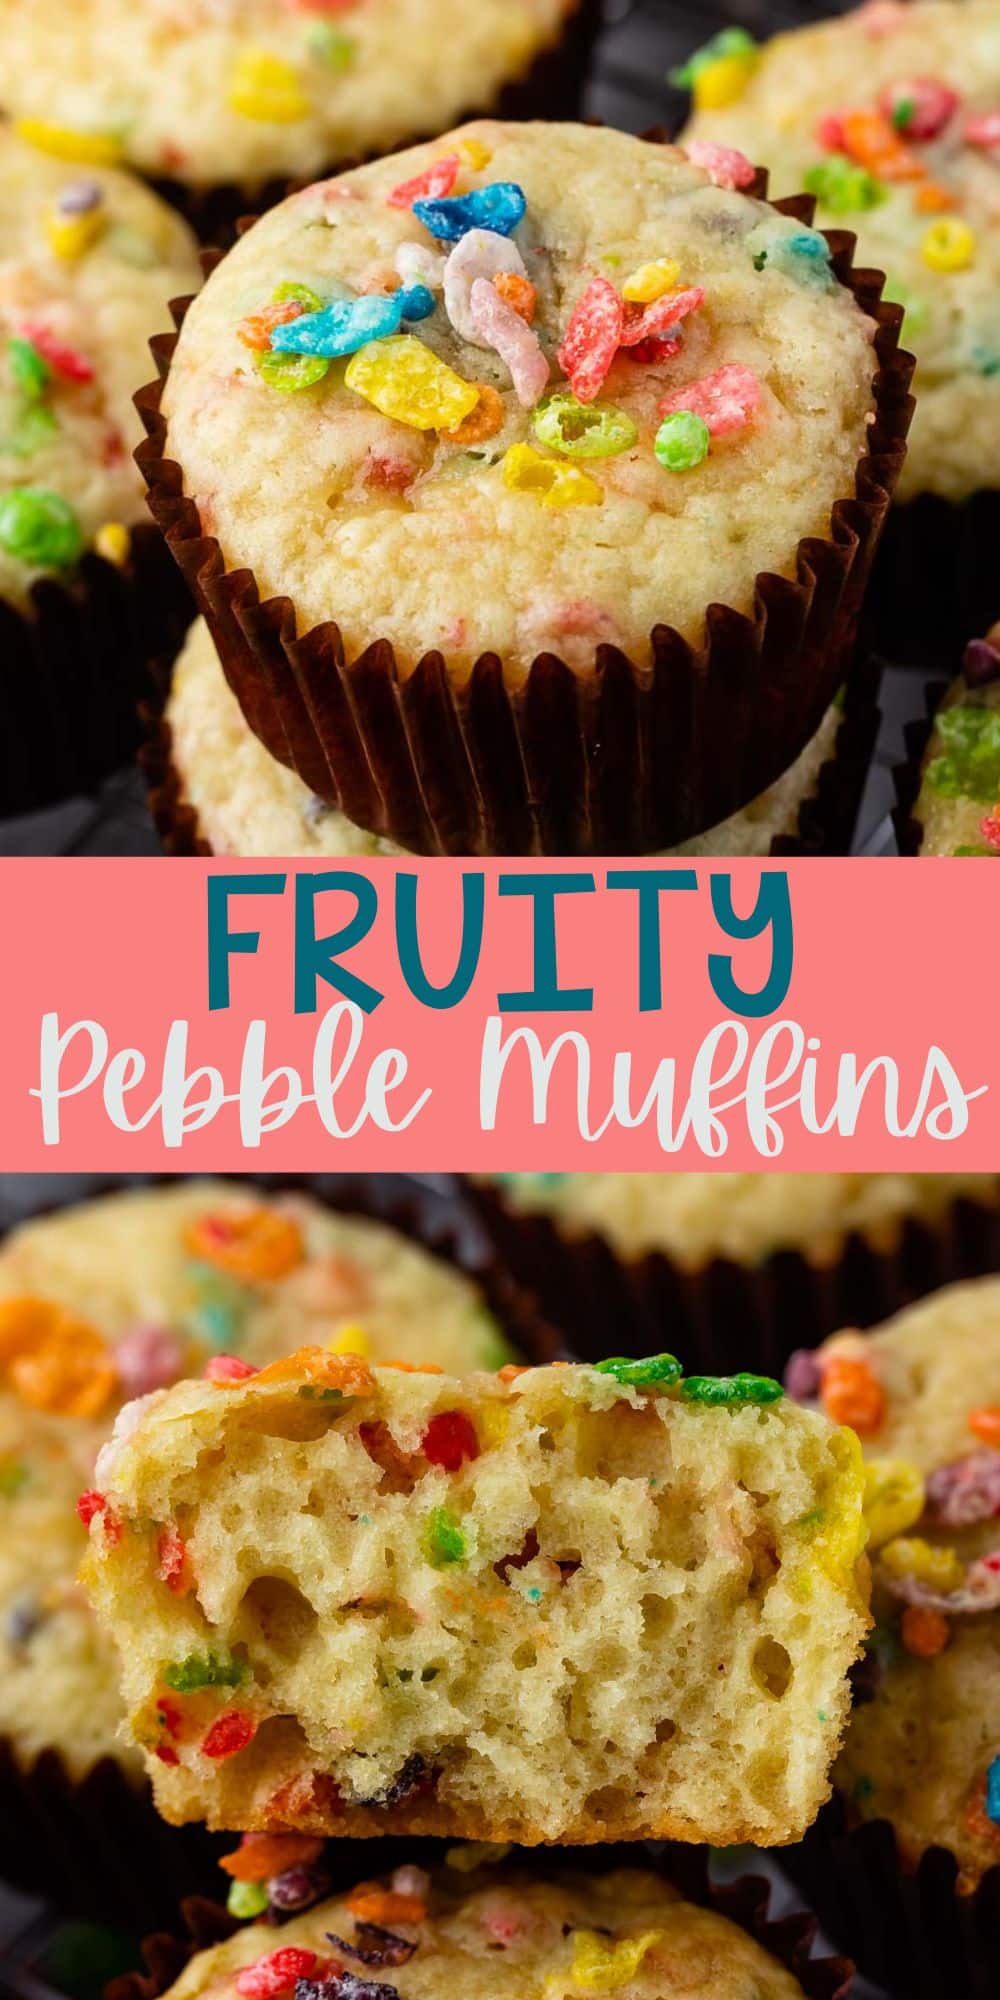 two images of fruity pebbles muffins in a brown cupcake tin topped with fruity pebble cereal with words on the image.